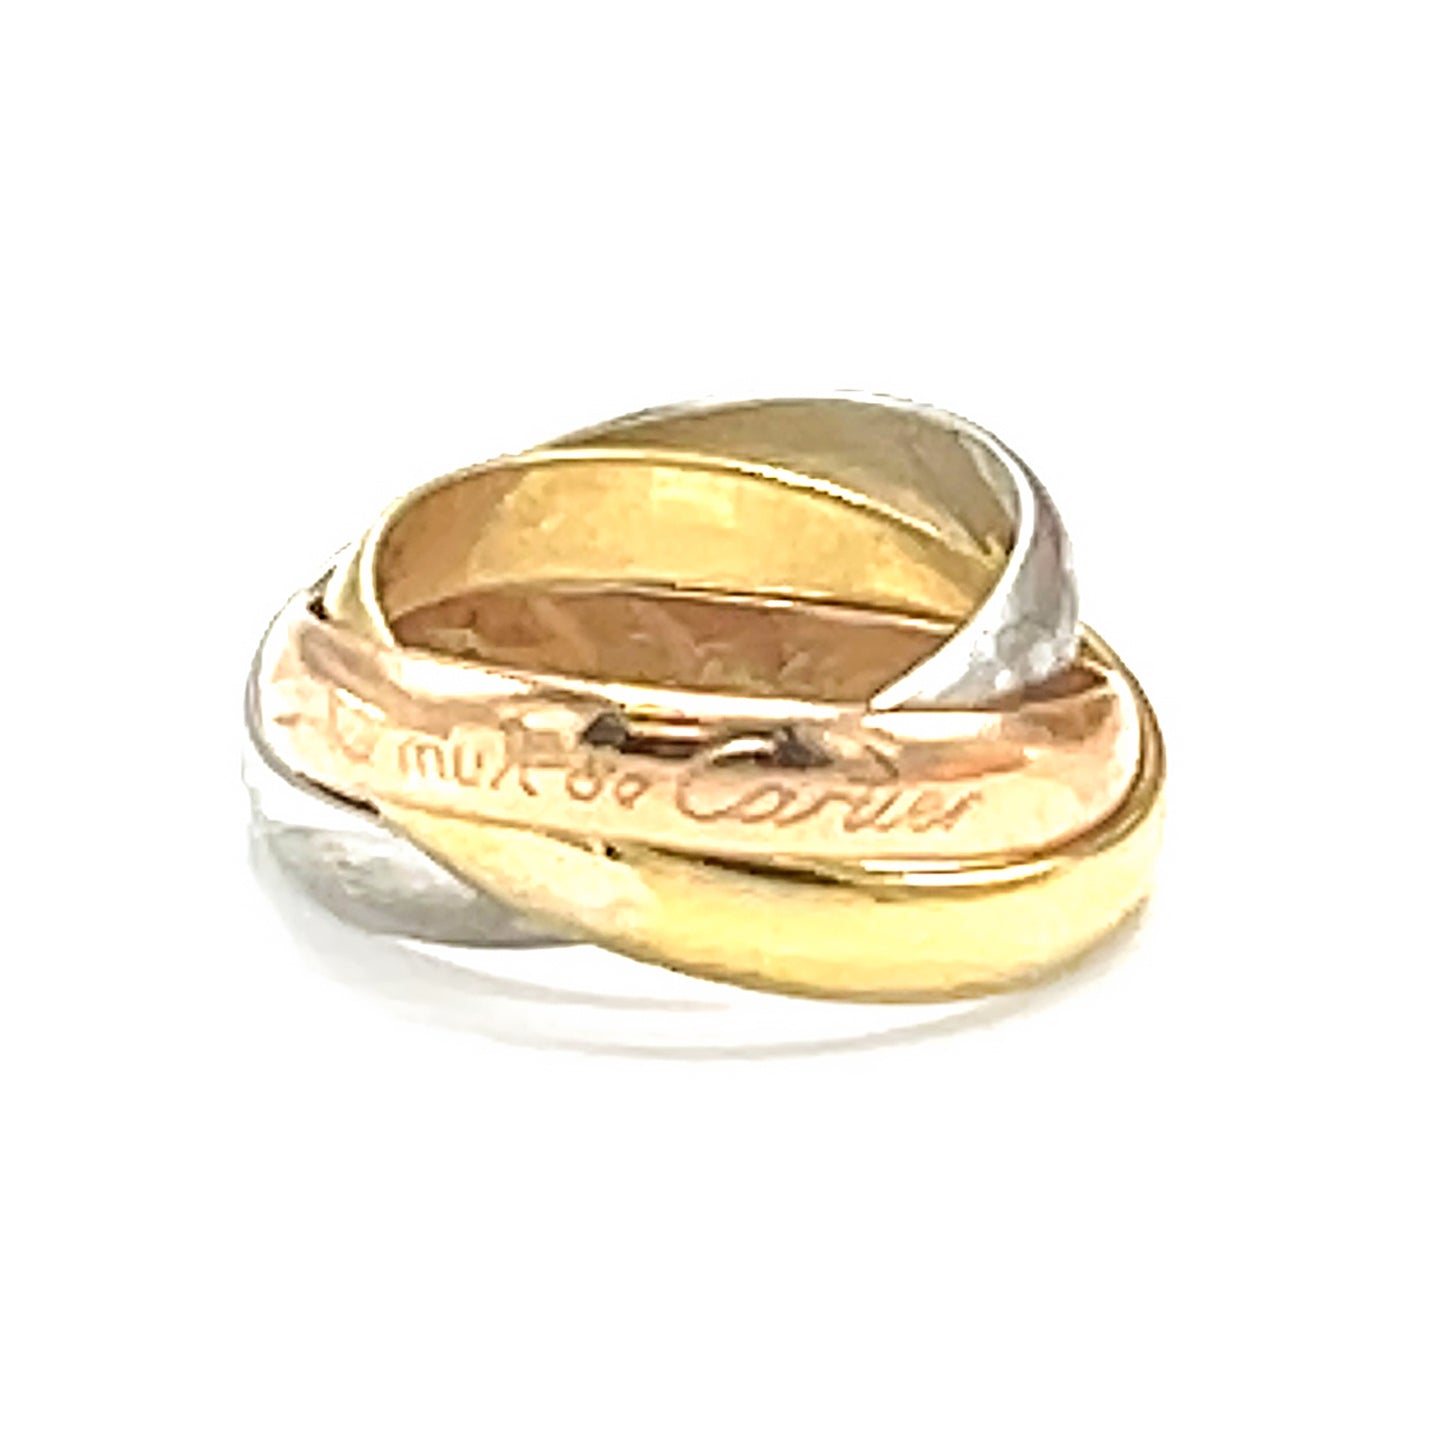 Cartier Three-Tone Small Trinity Ring 18K White Yellow and Pink Gold Size  53 | eBay